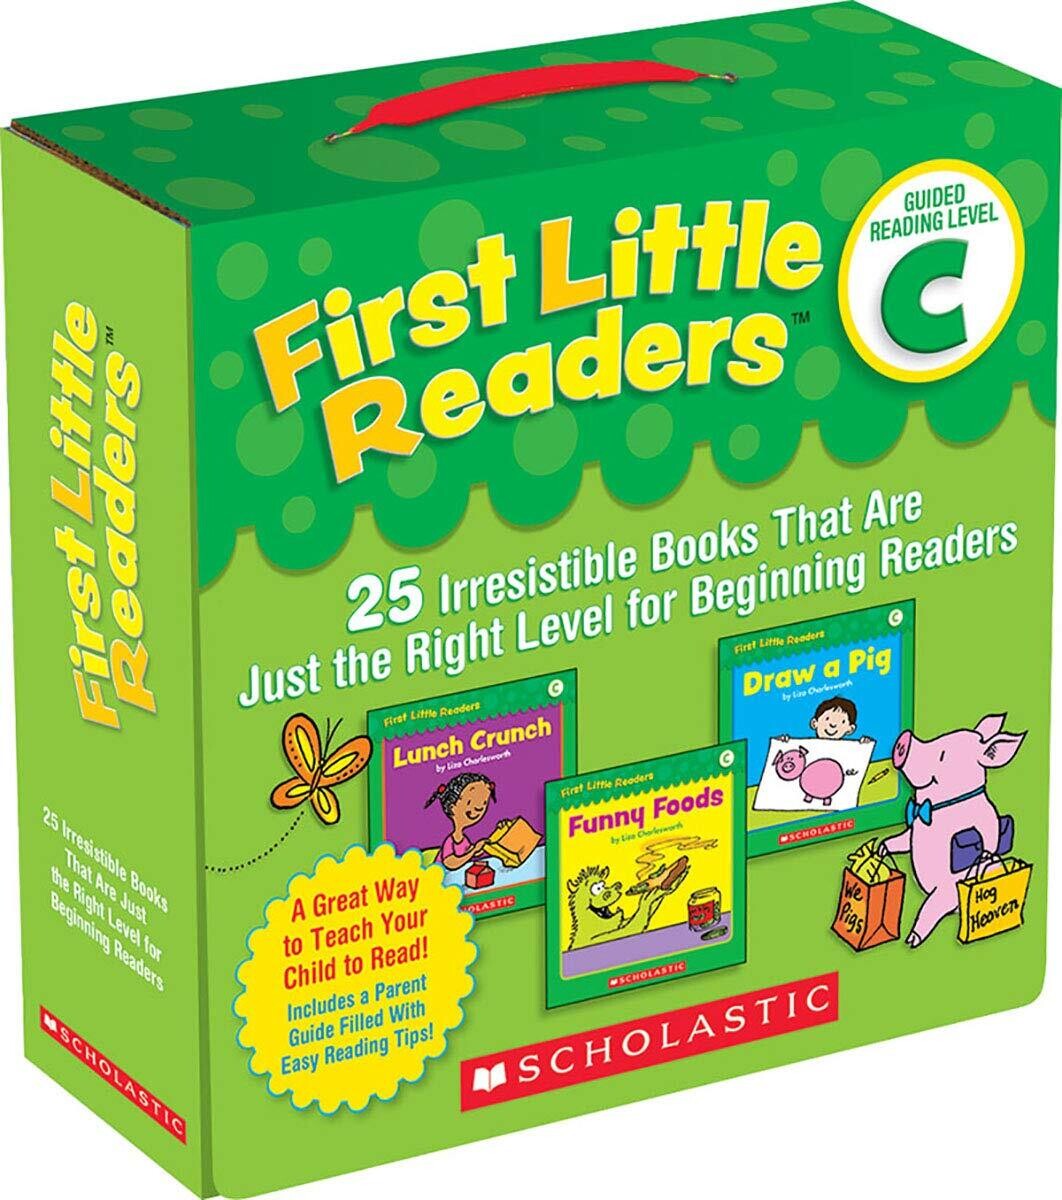 First Little Readers: Guided Reading Level C (Parent Pack): 25 Irresistible Books